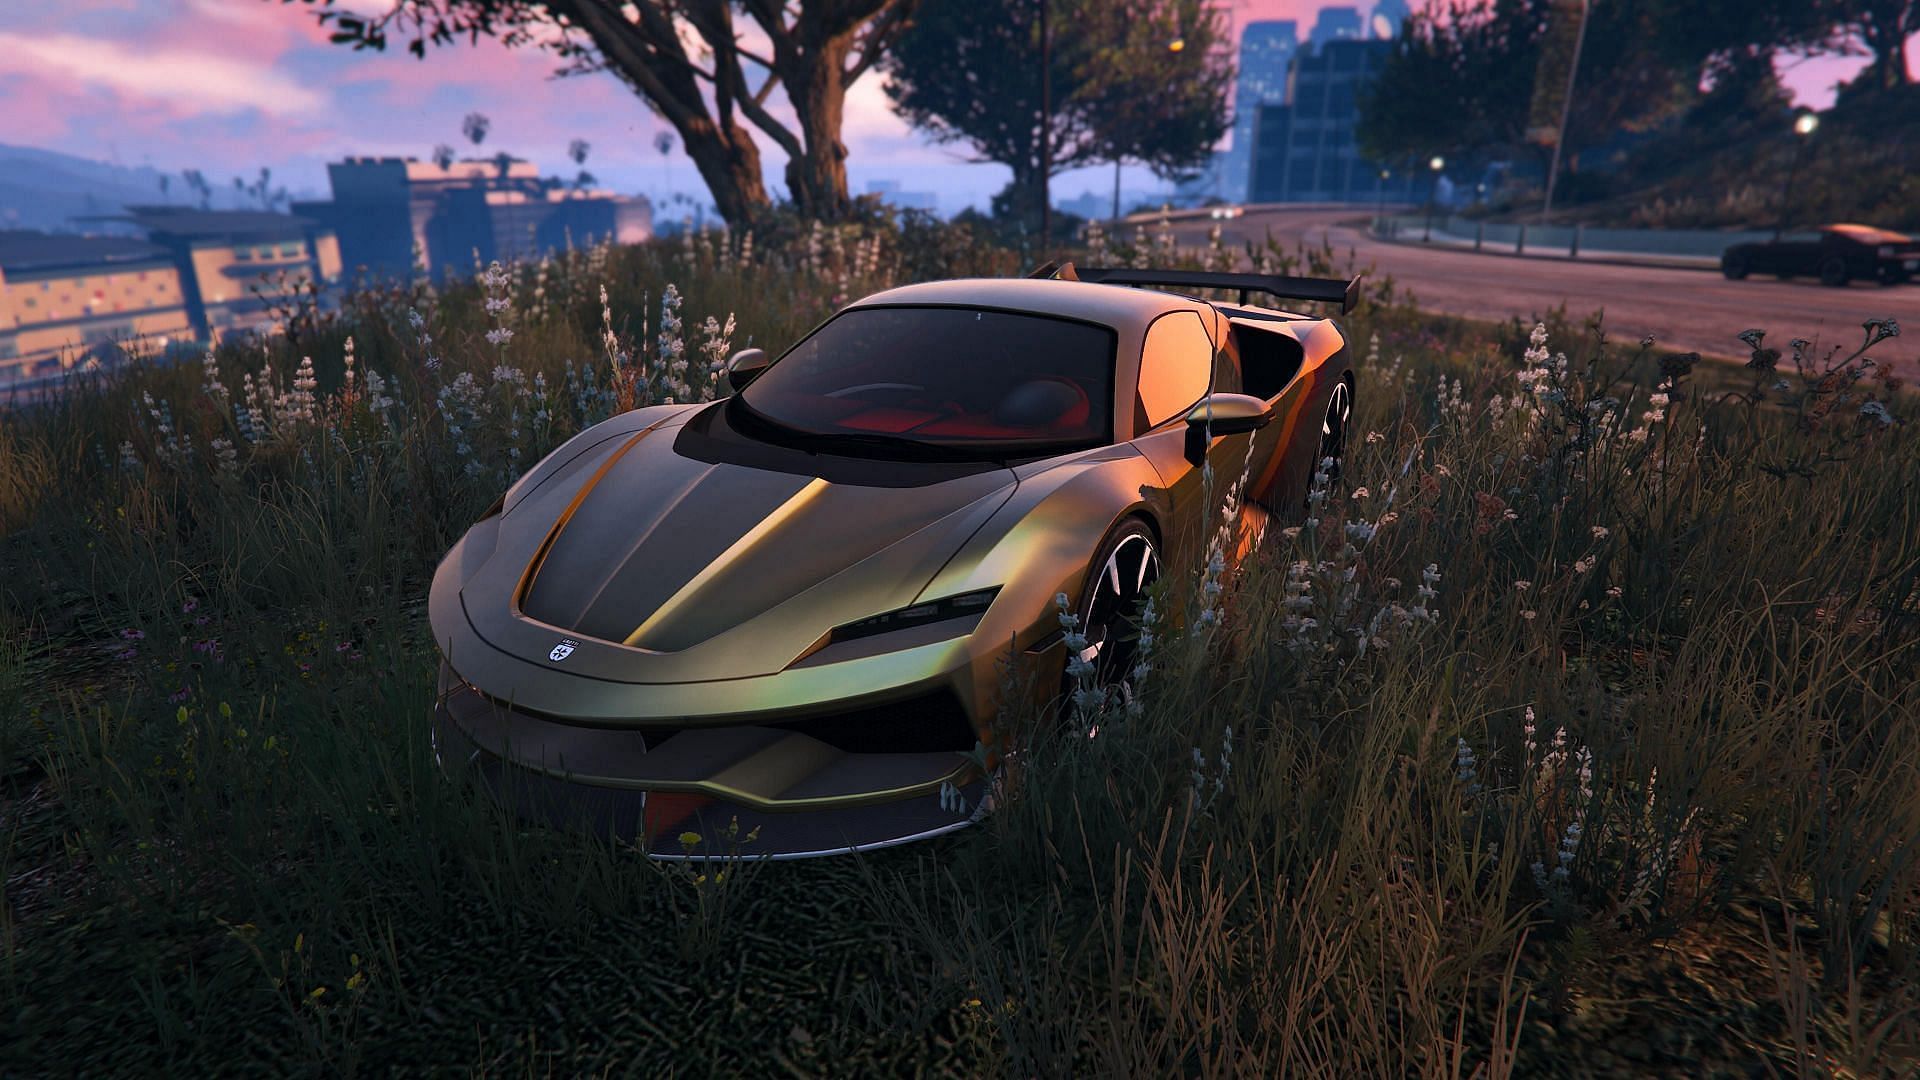 The Itali RSX has historically been very good in GTA Online (Image via Rockstar Games)